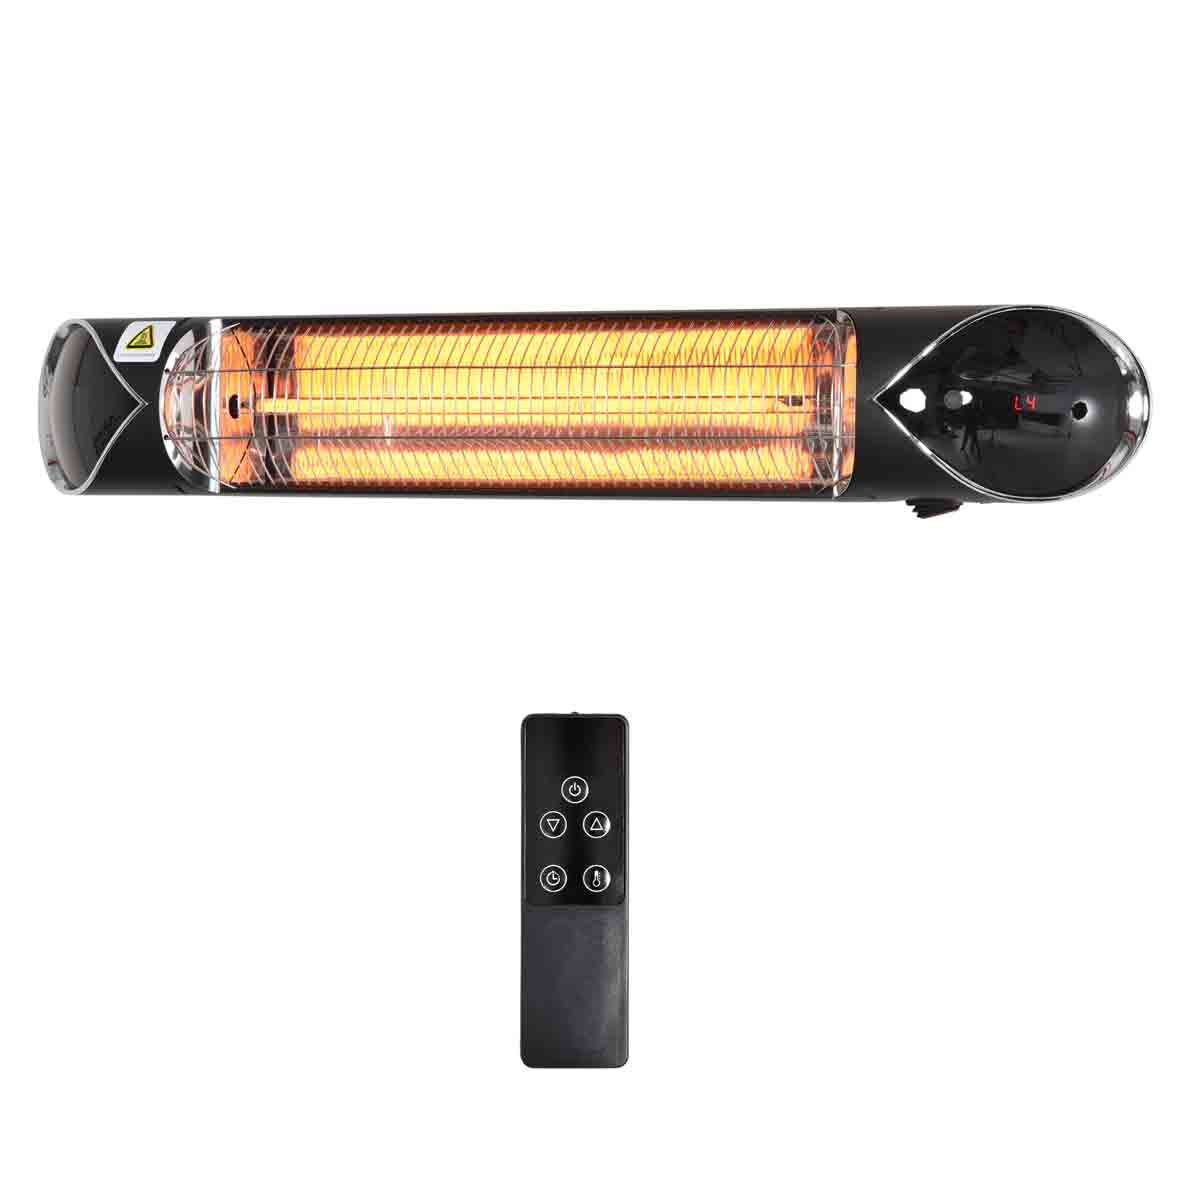 Outsunny 2000W Electric Infrared Patio Heater Wall Mounted Heater W/ Remote